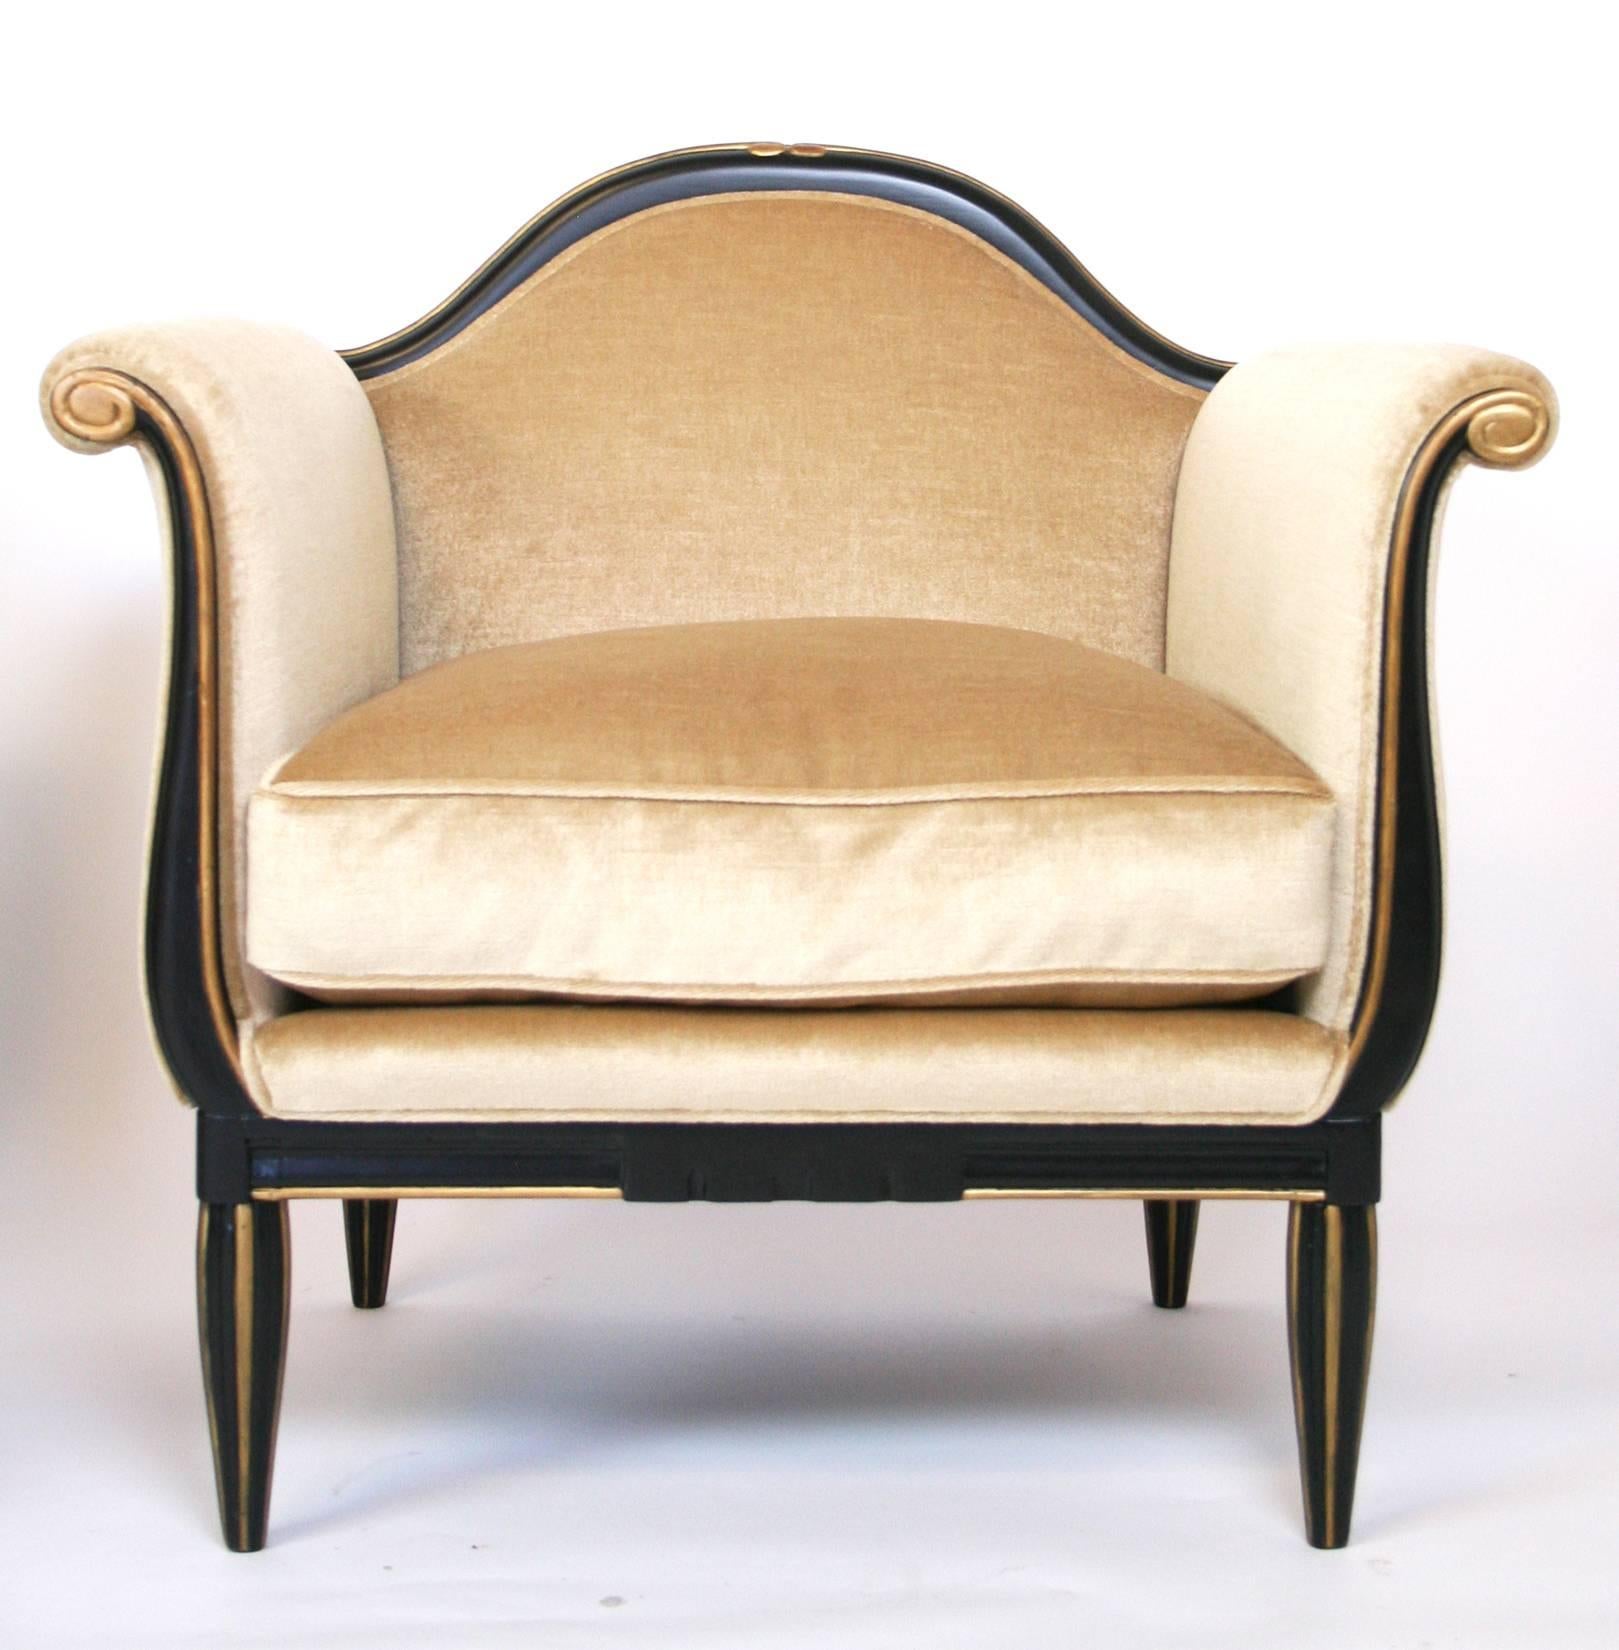 A pair of French Art Deco lounge chairs in the manner of Paul Follot. Black lacquered and gold carved, fluted legs and frame. Newly upholstered.